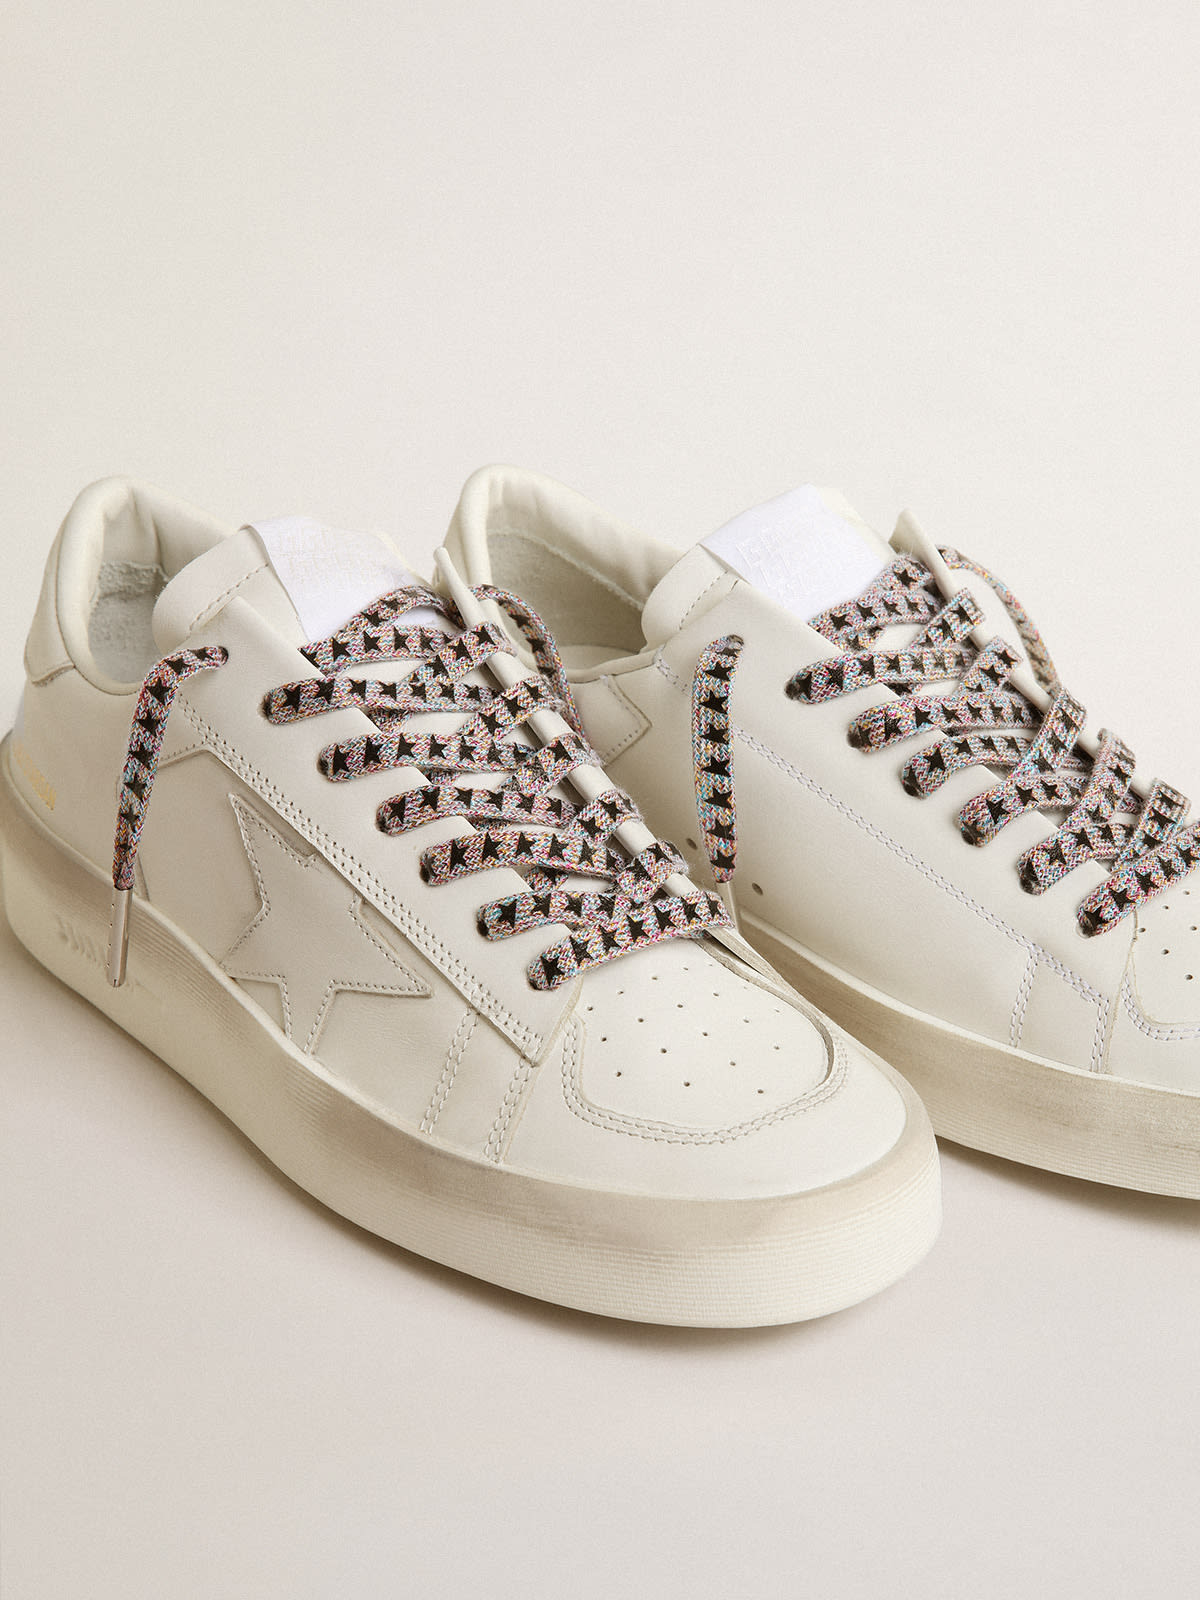 Golden Goose - Multicolor lurex laces with black stars in 